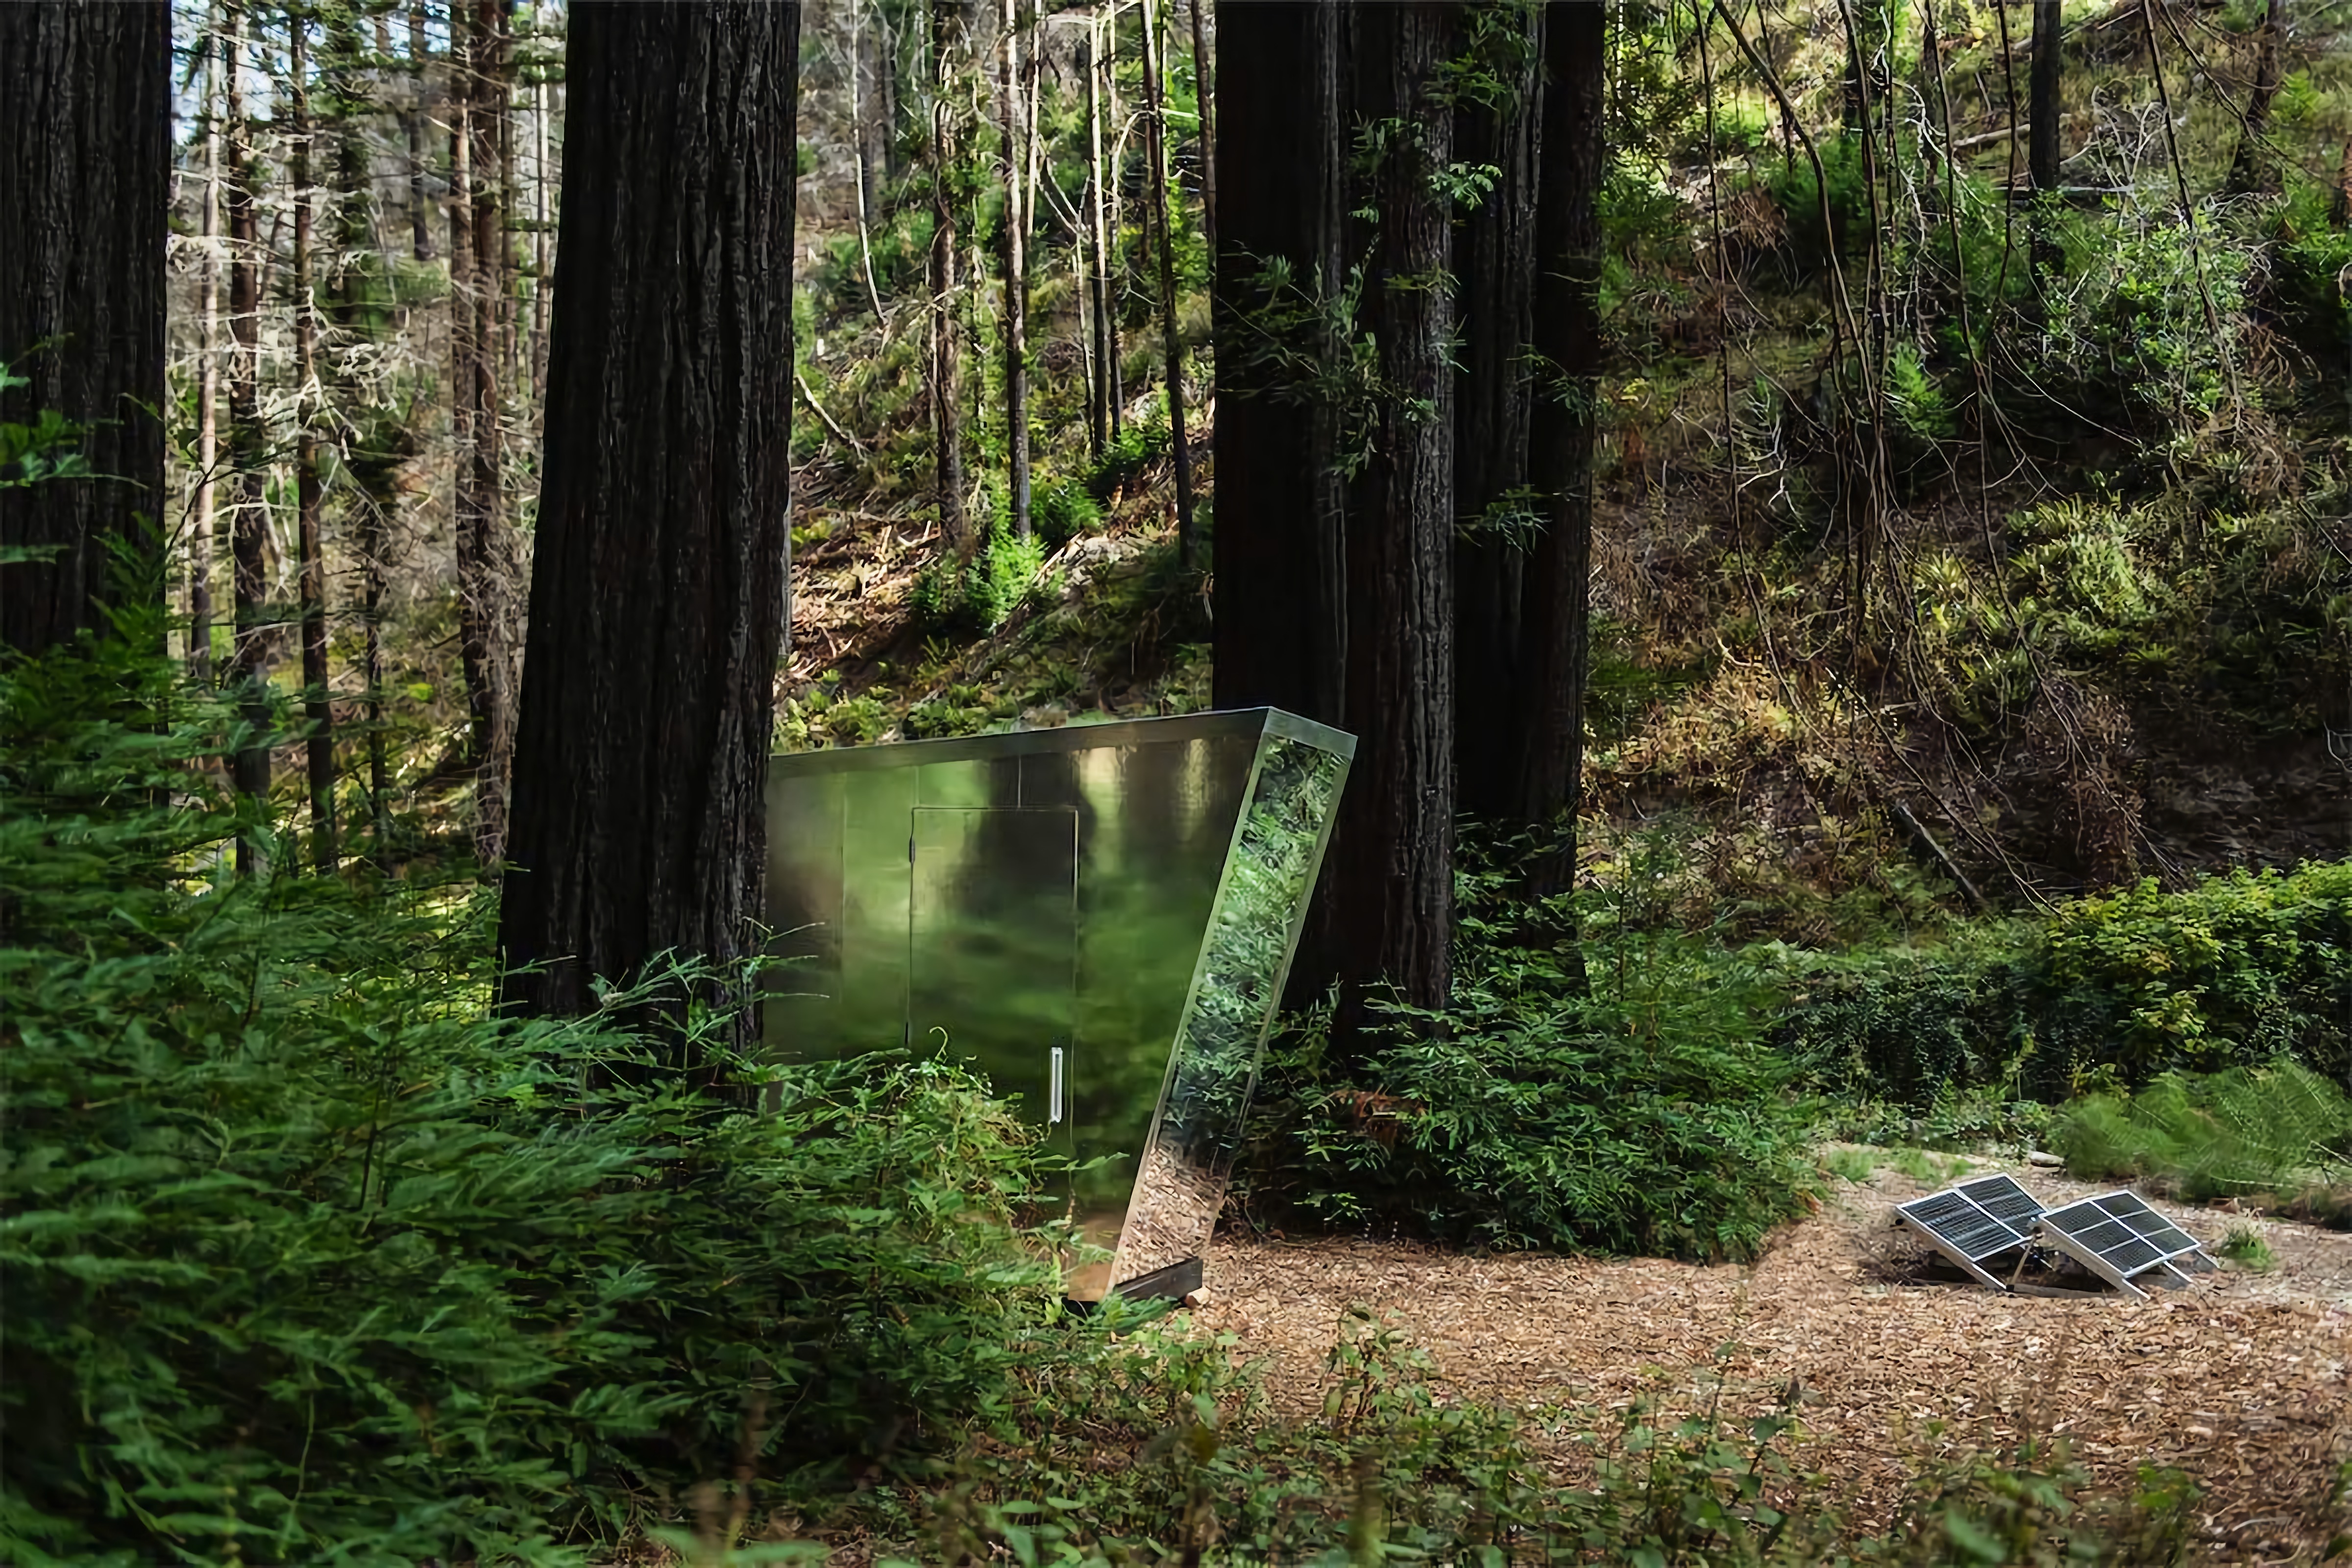 The reflective glass material seems to disguise The Portal's presence in the middle of the forest